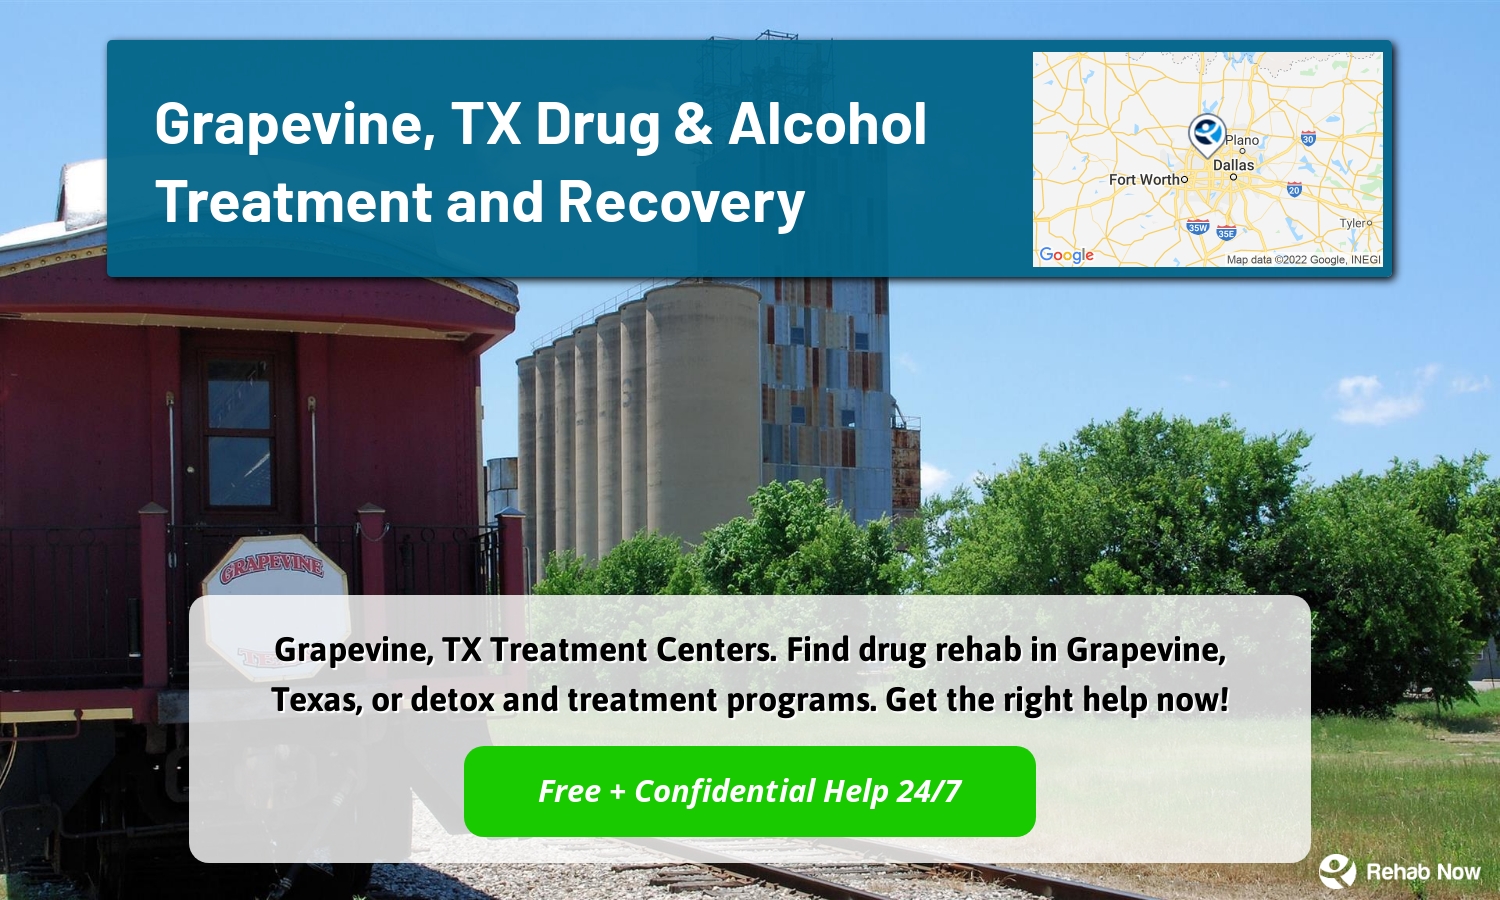 Grapevine, TX Treatment Centers. Find drug rehab in Grapevine, Texas, or detox and treatment programs. Get the right help now!